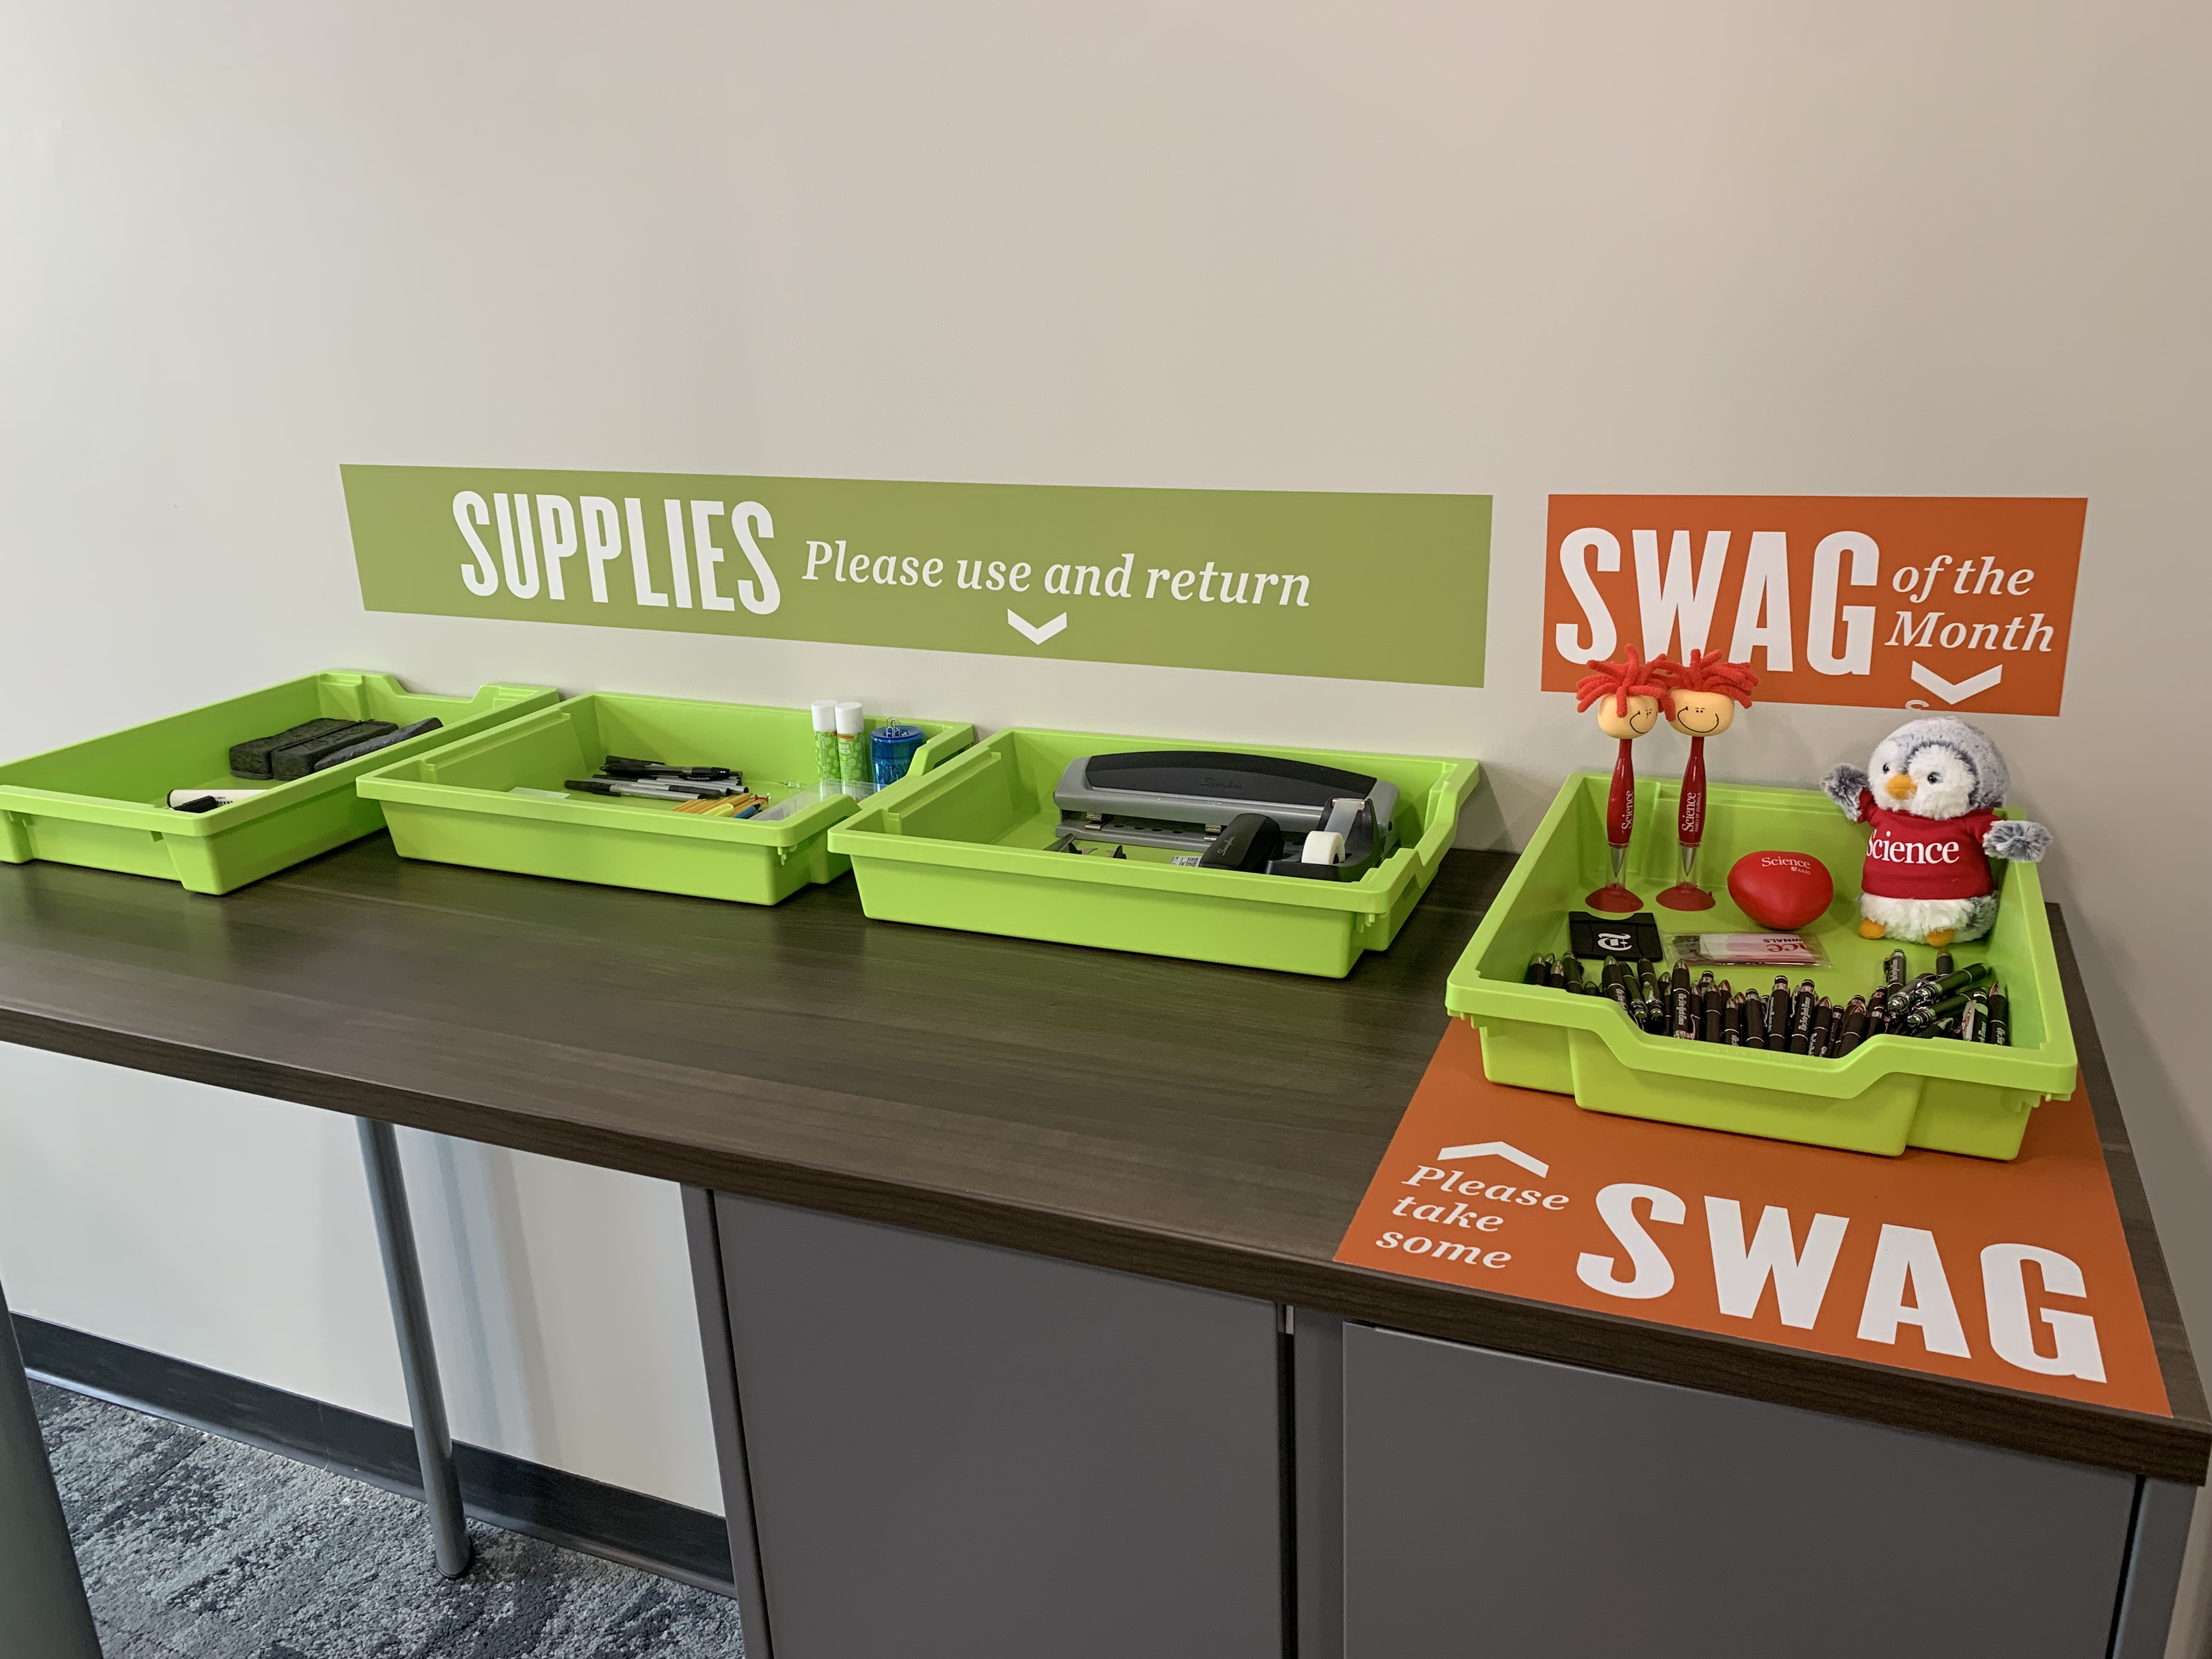 Office supplies and promotional swag organized in baskets on a tabletop